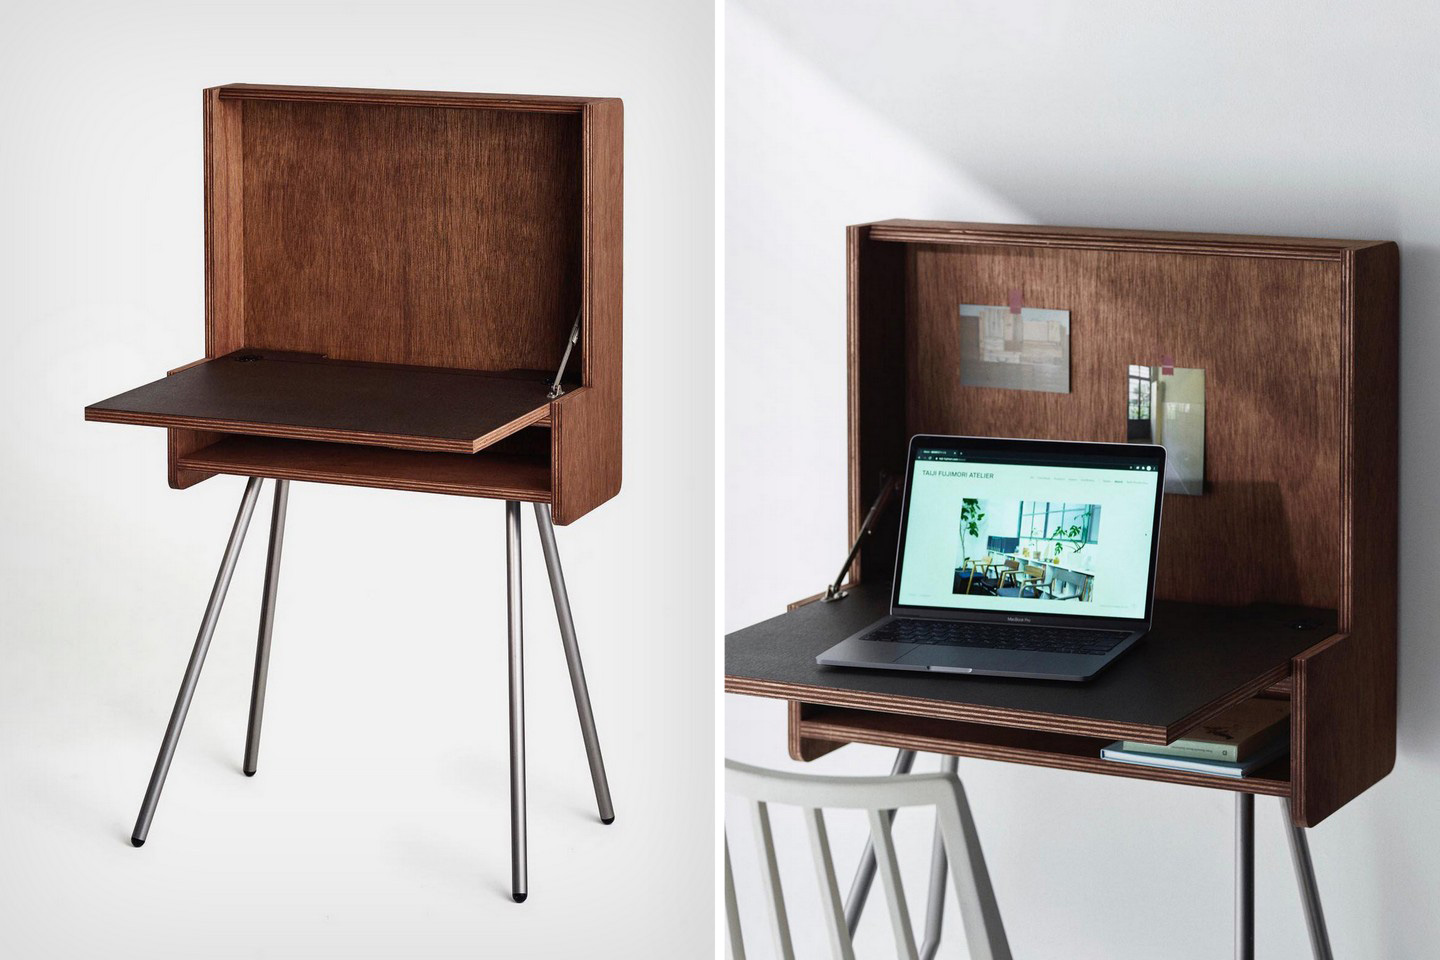 #This bureau-style desk comes with a foldout table, a shelf, and even a dock for your laptop